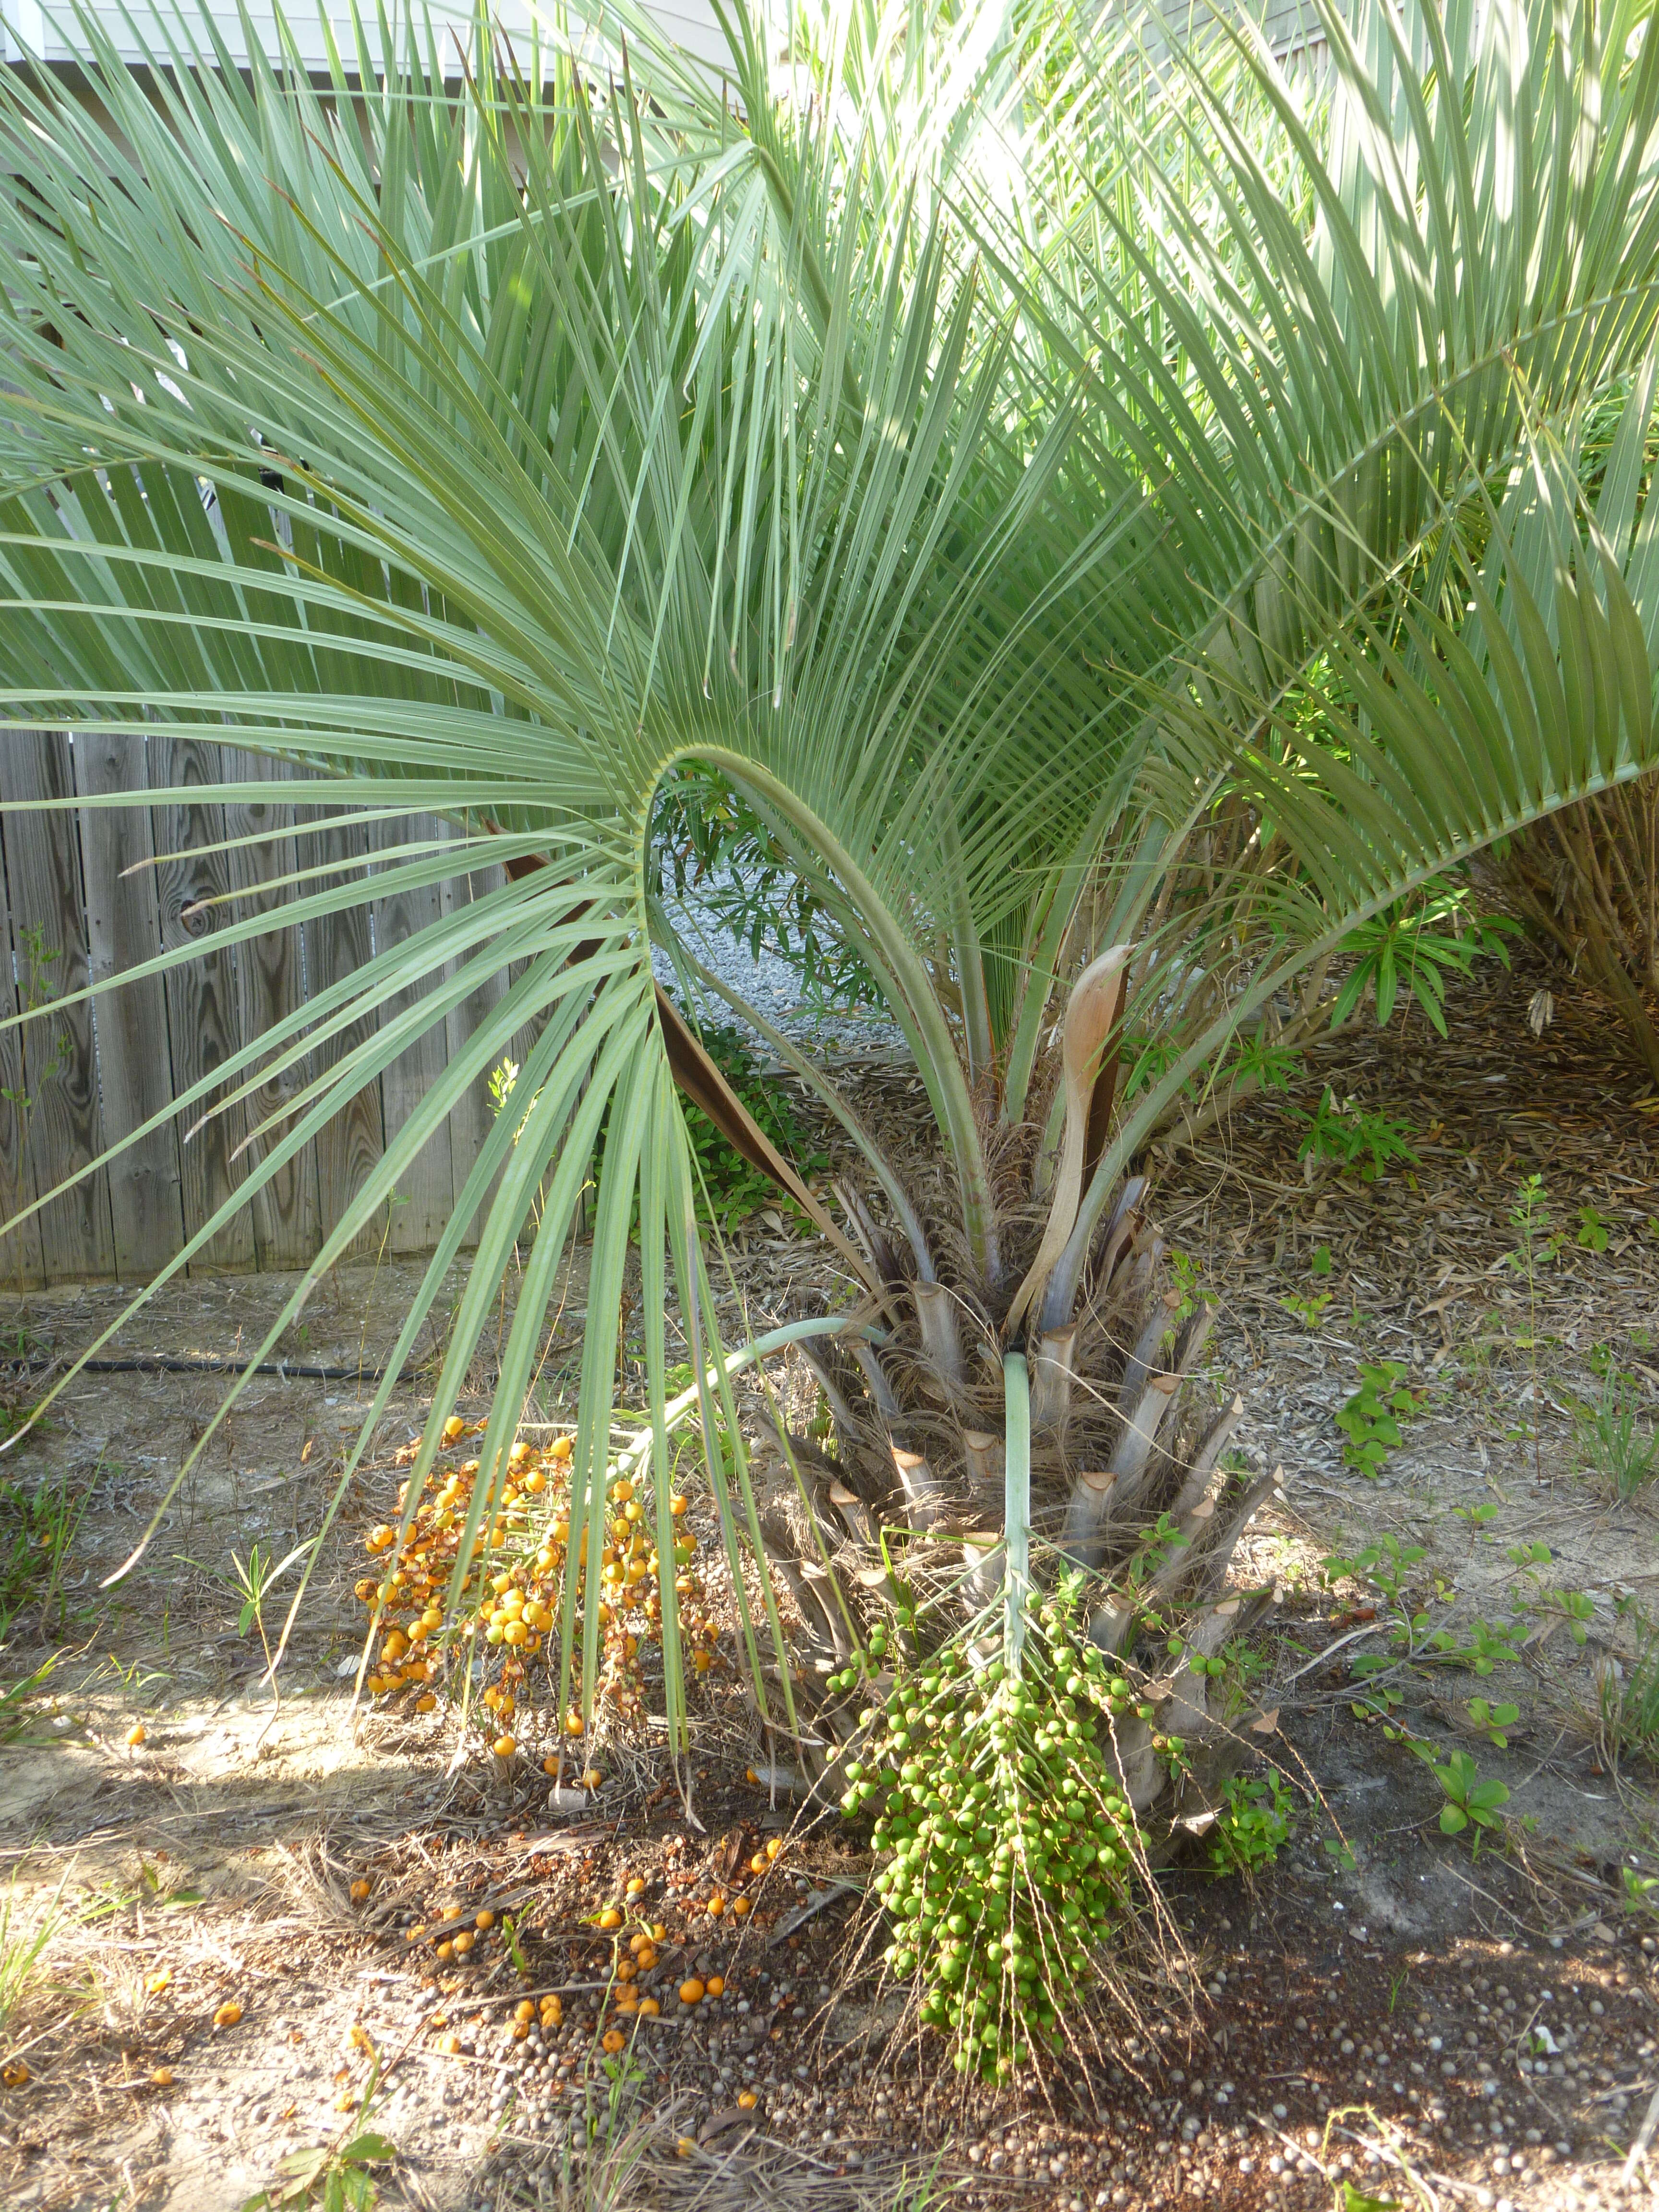 Image of South American jelly palm